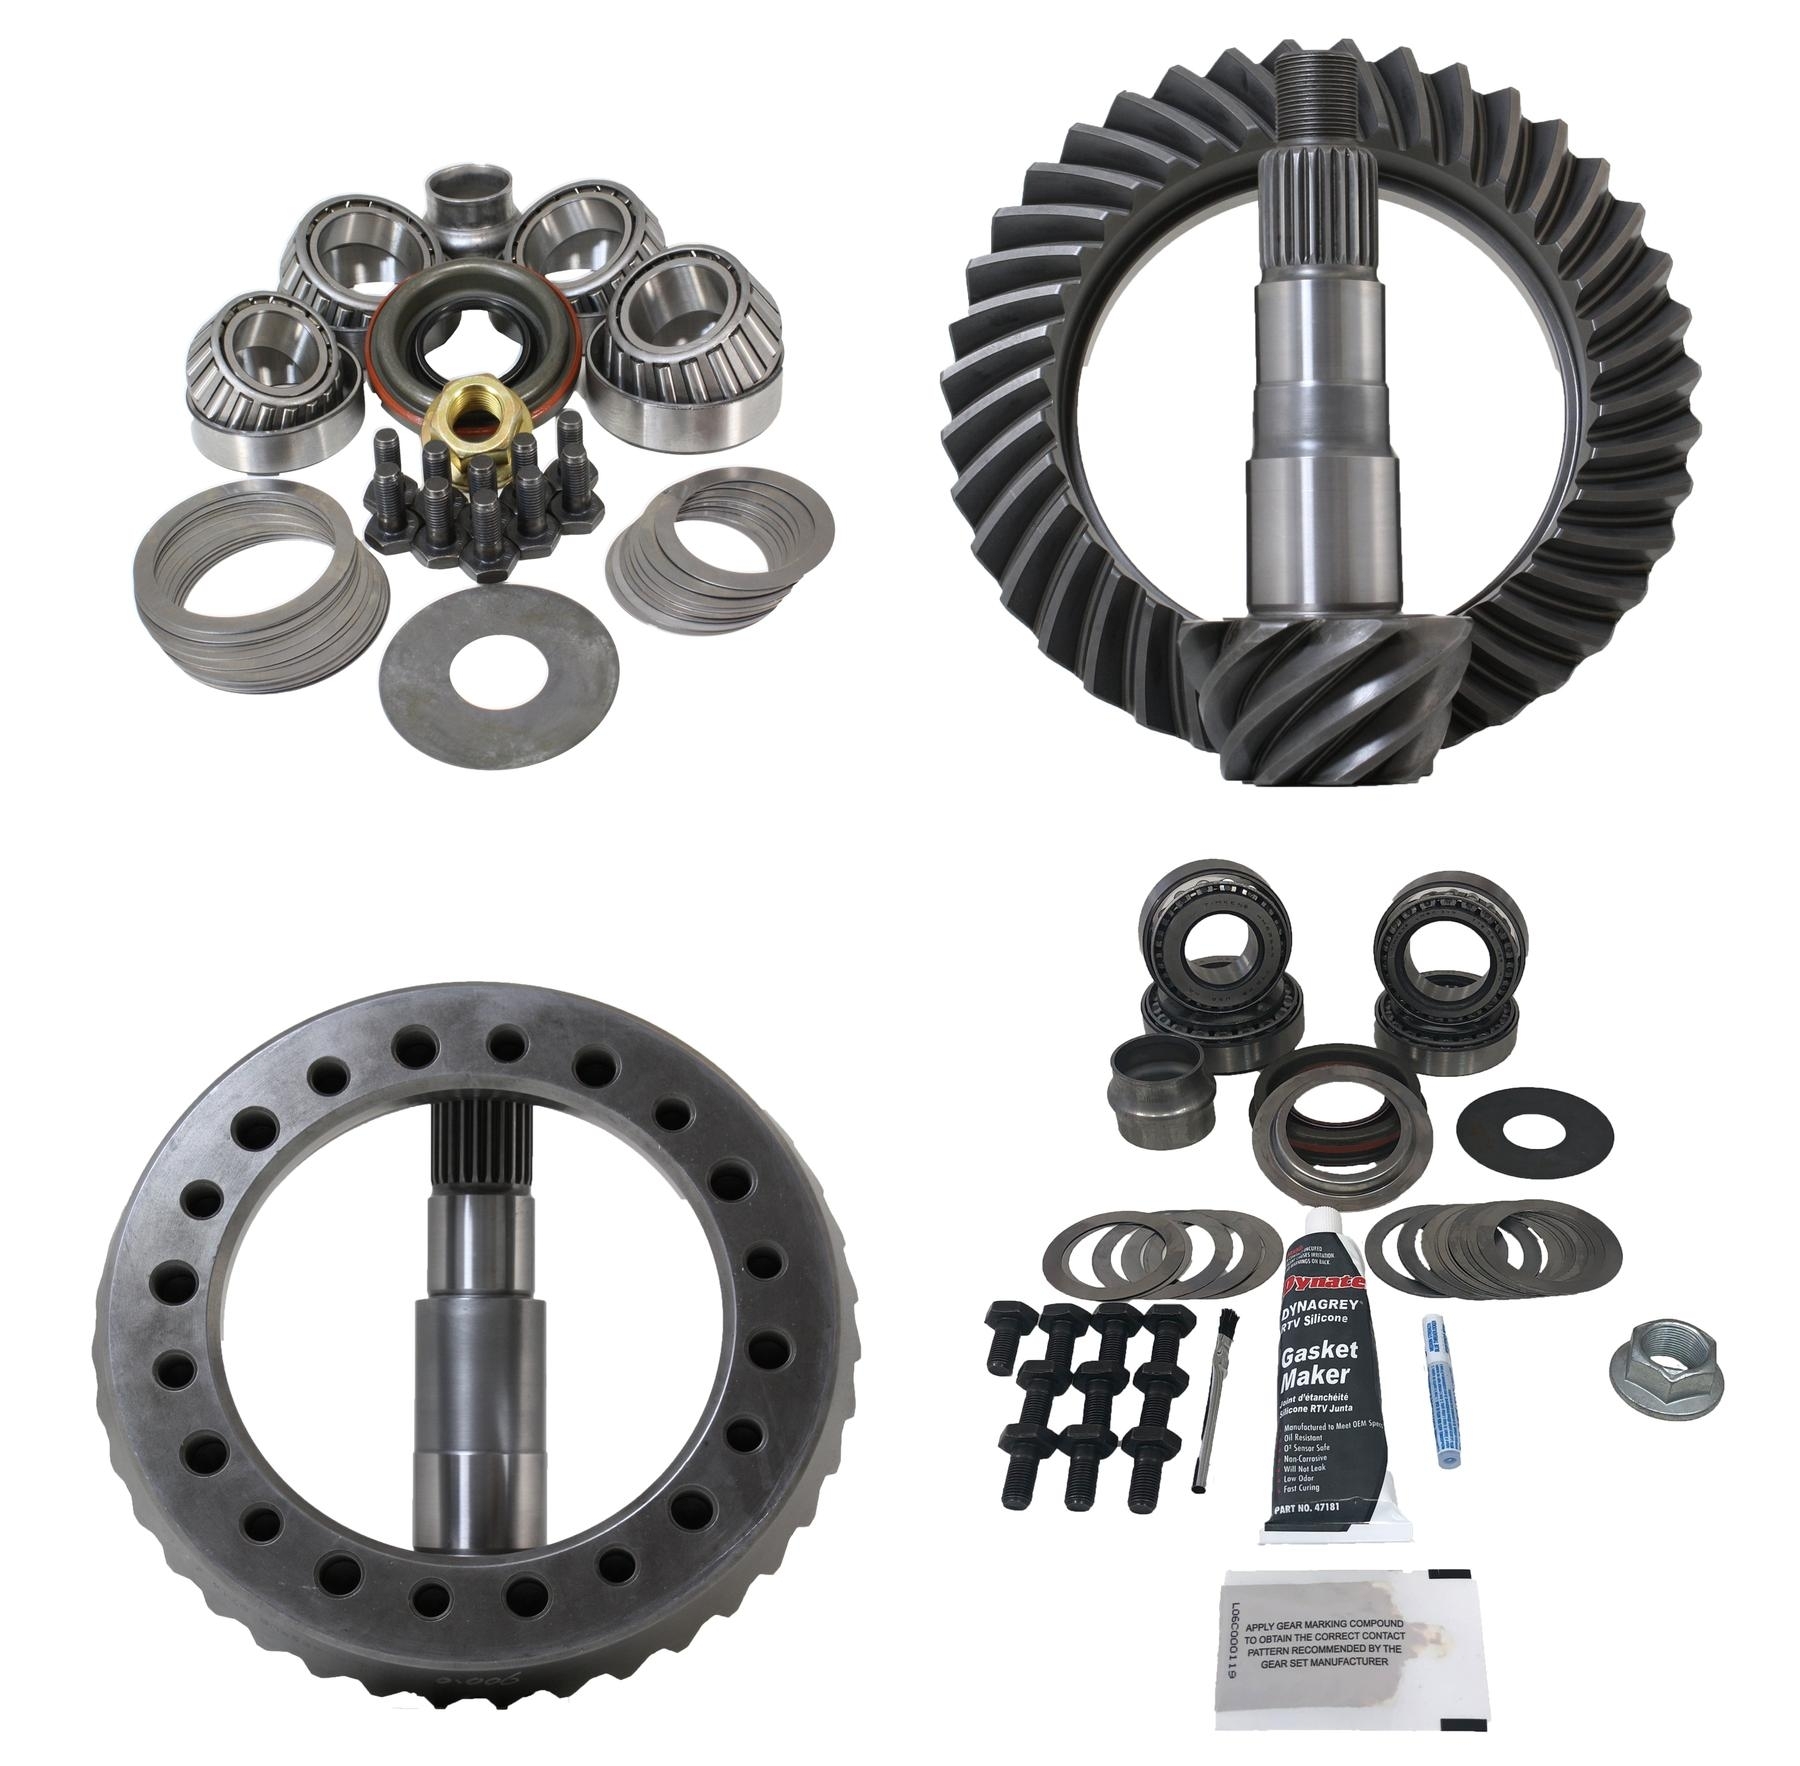 Revolution Gear & Axle Front And Rear Gear Package With Factory Locker, T8.2, T8 Ifs, 4.88 Ratio